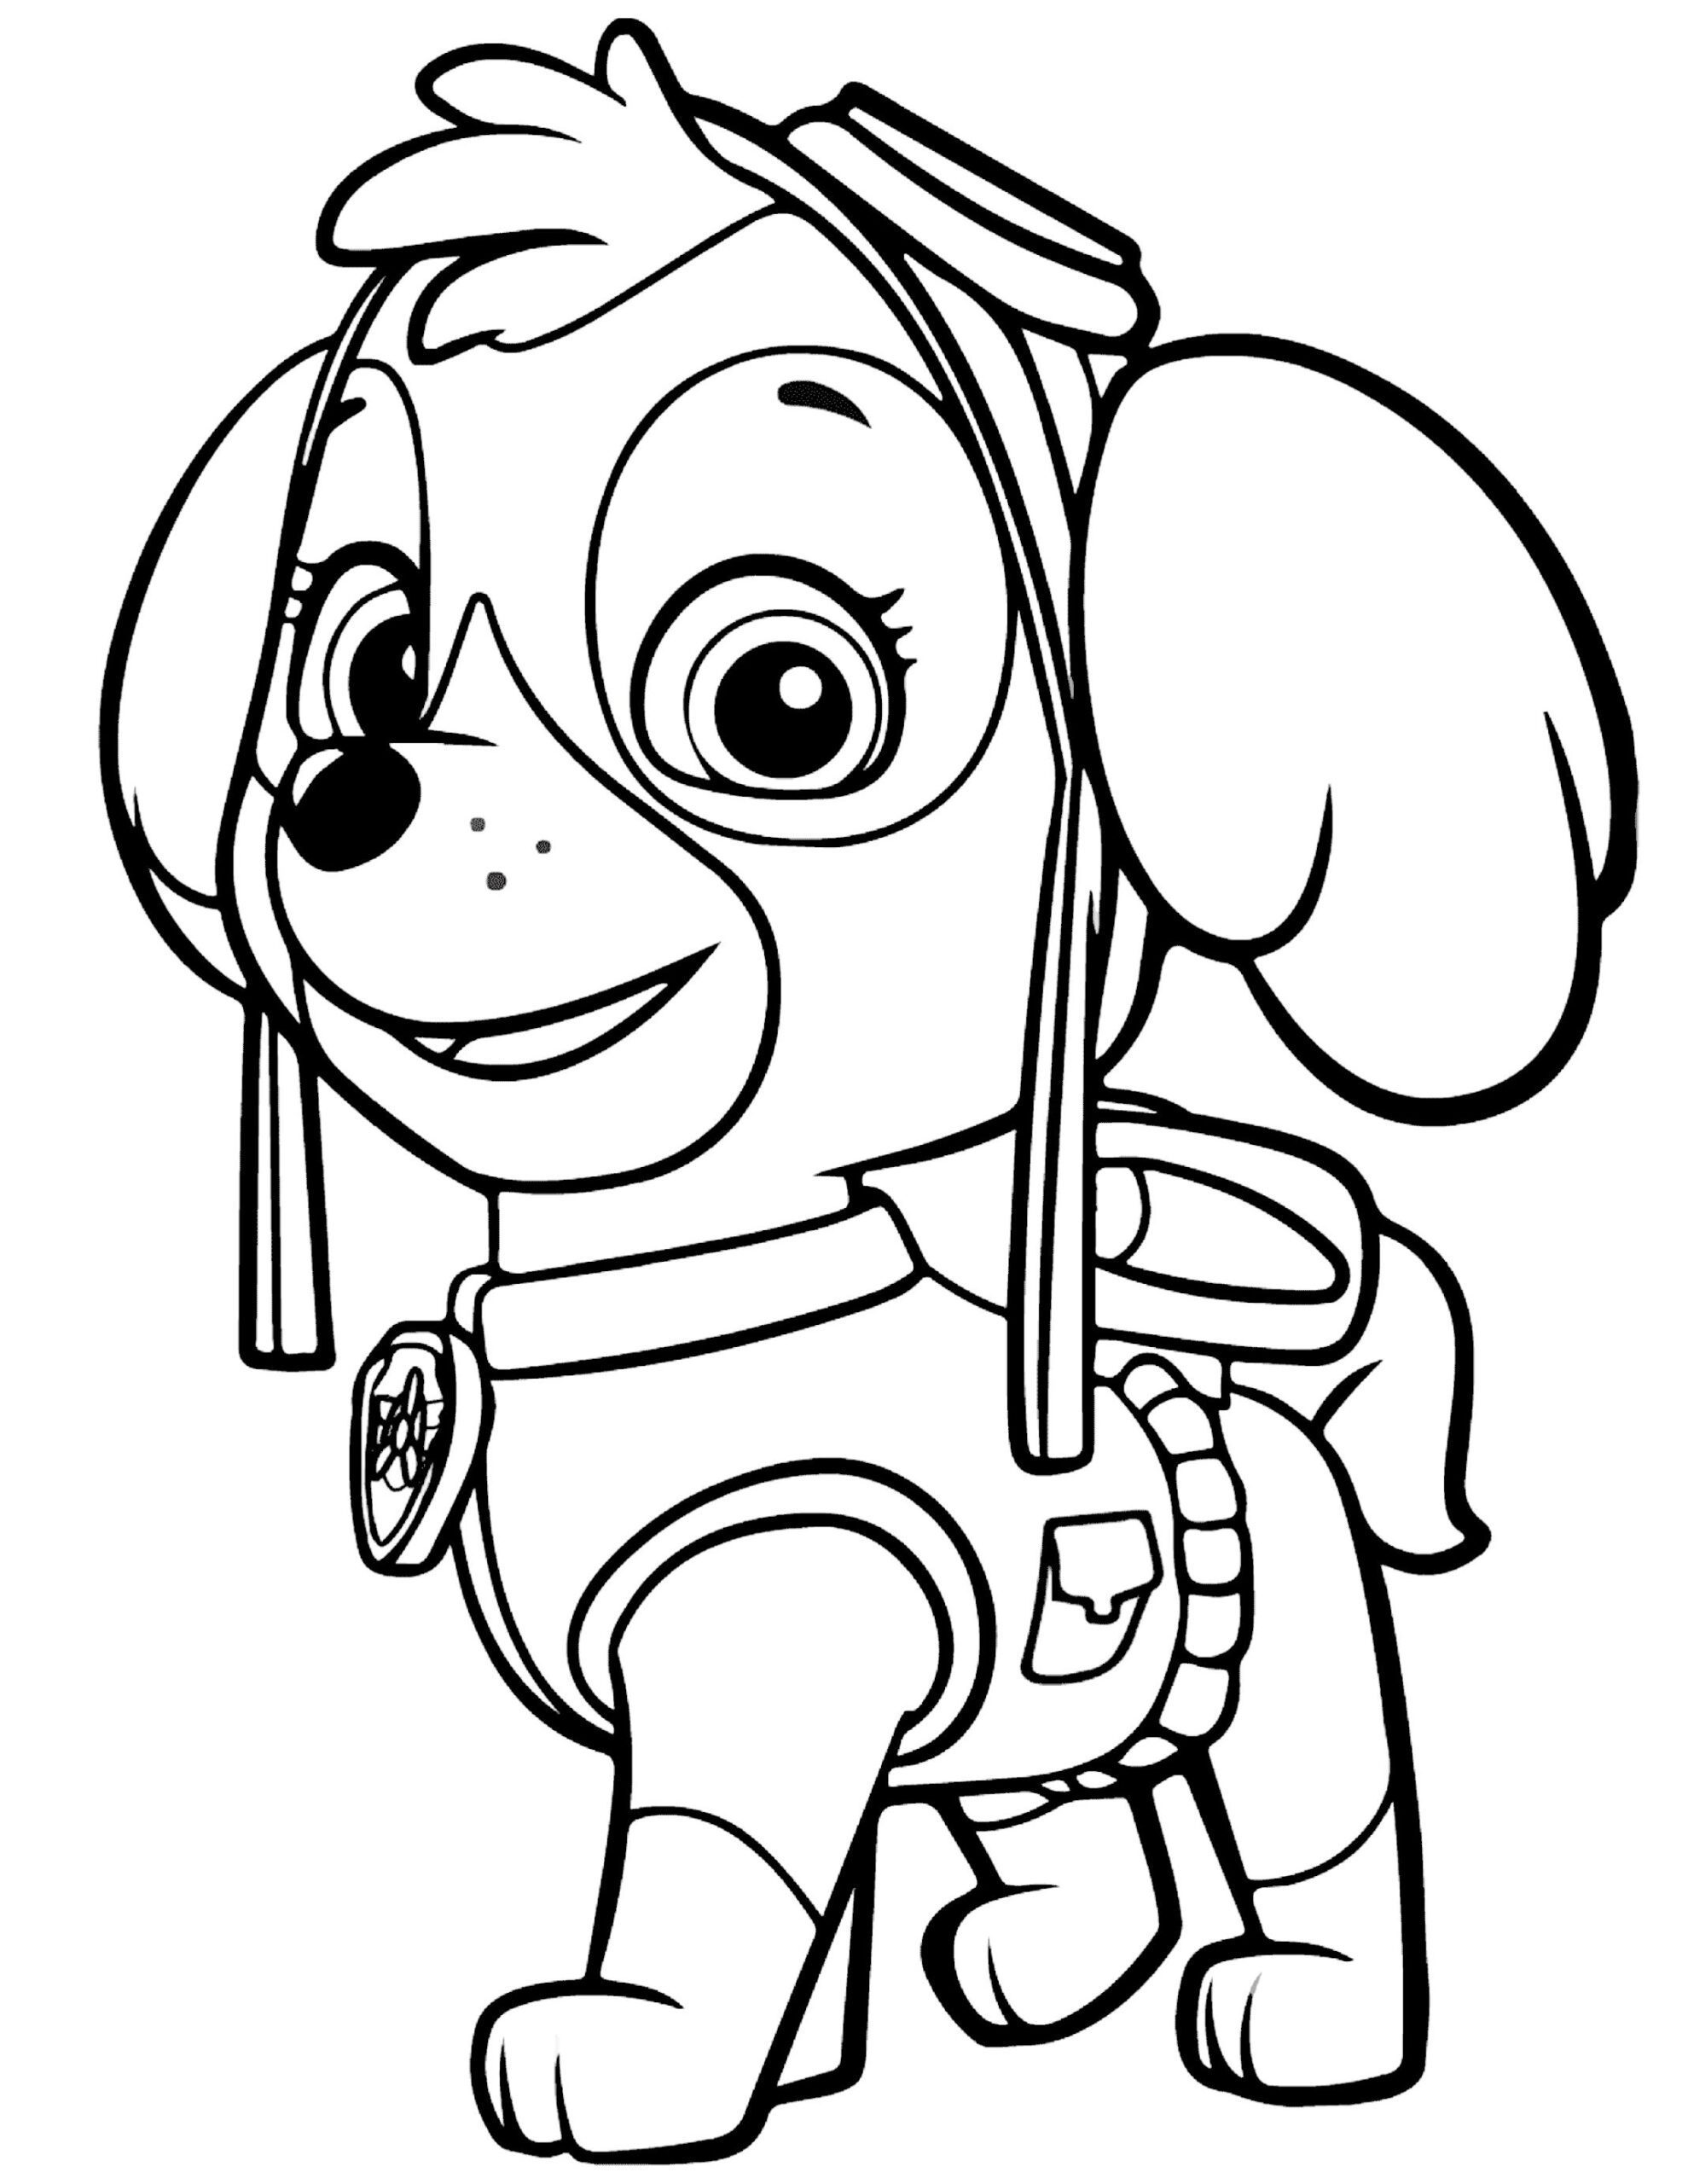 50+ Paw Patrol Coloring Pages For Kids